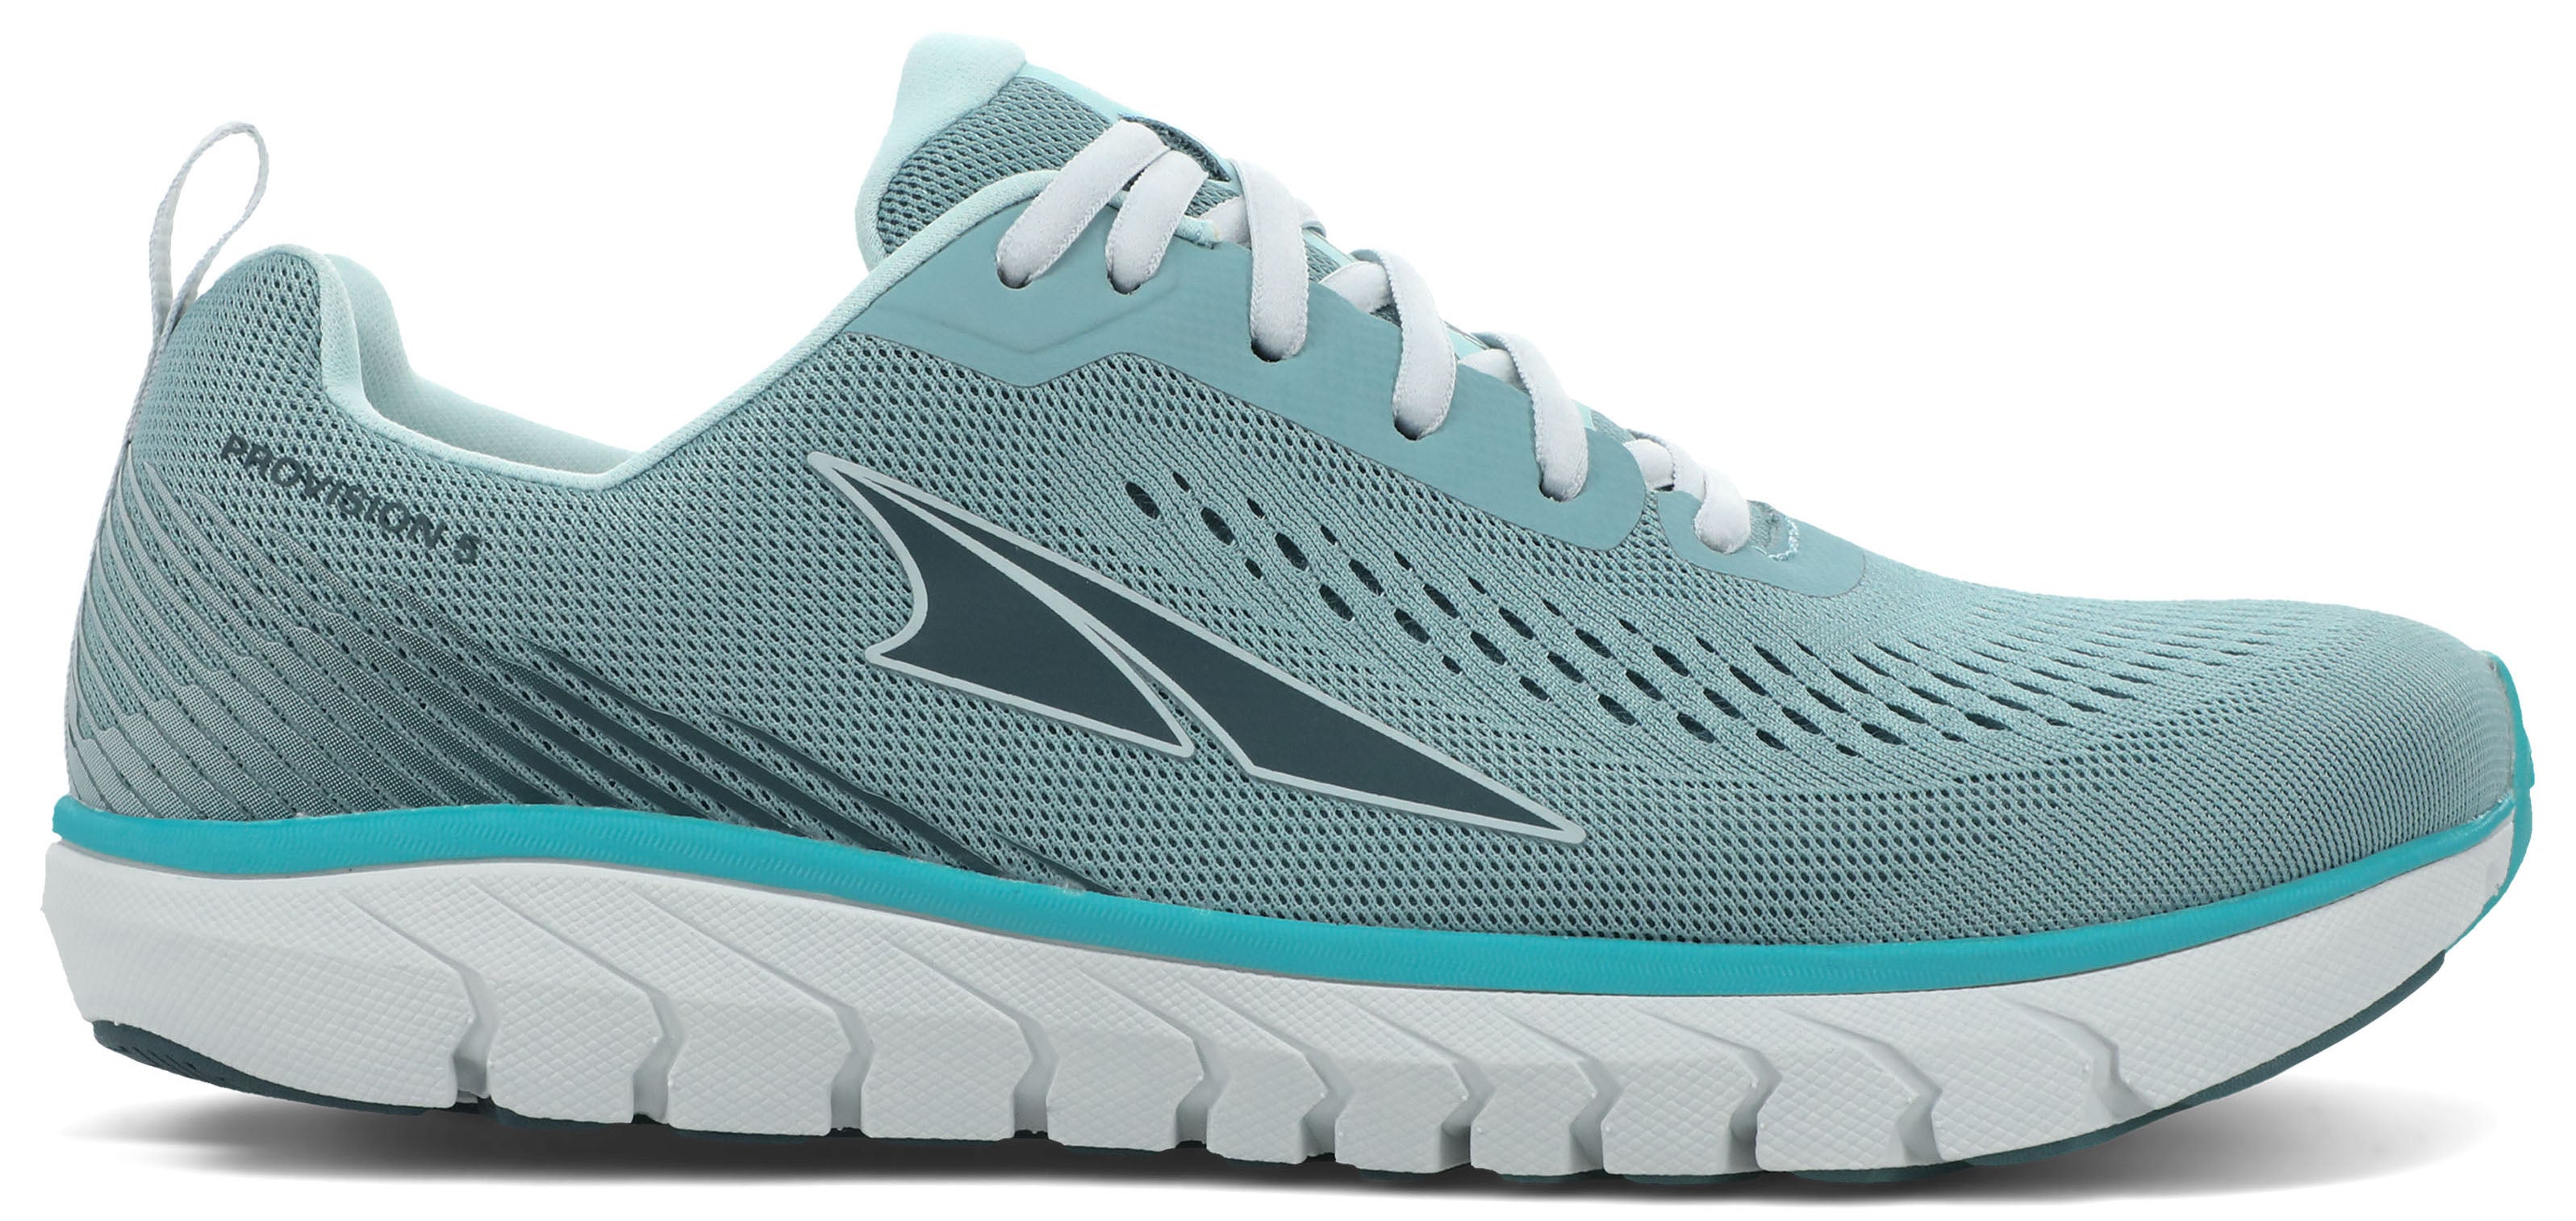 Women's Altra Provision 5 Road Running Shoe in Teal/Green from the side